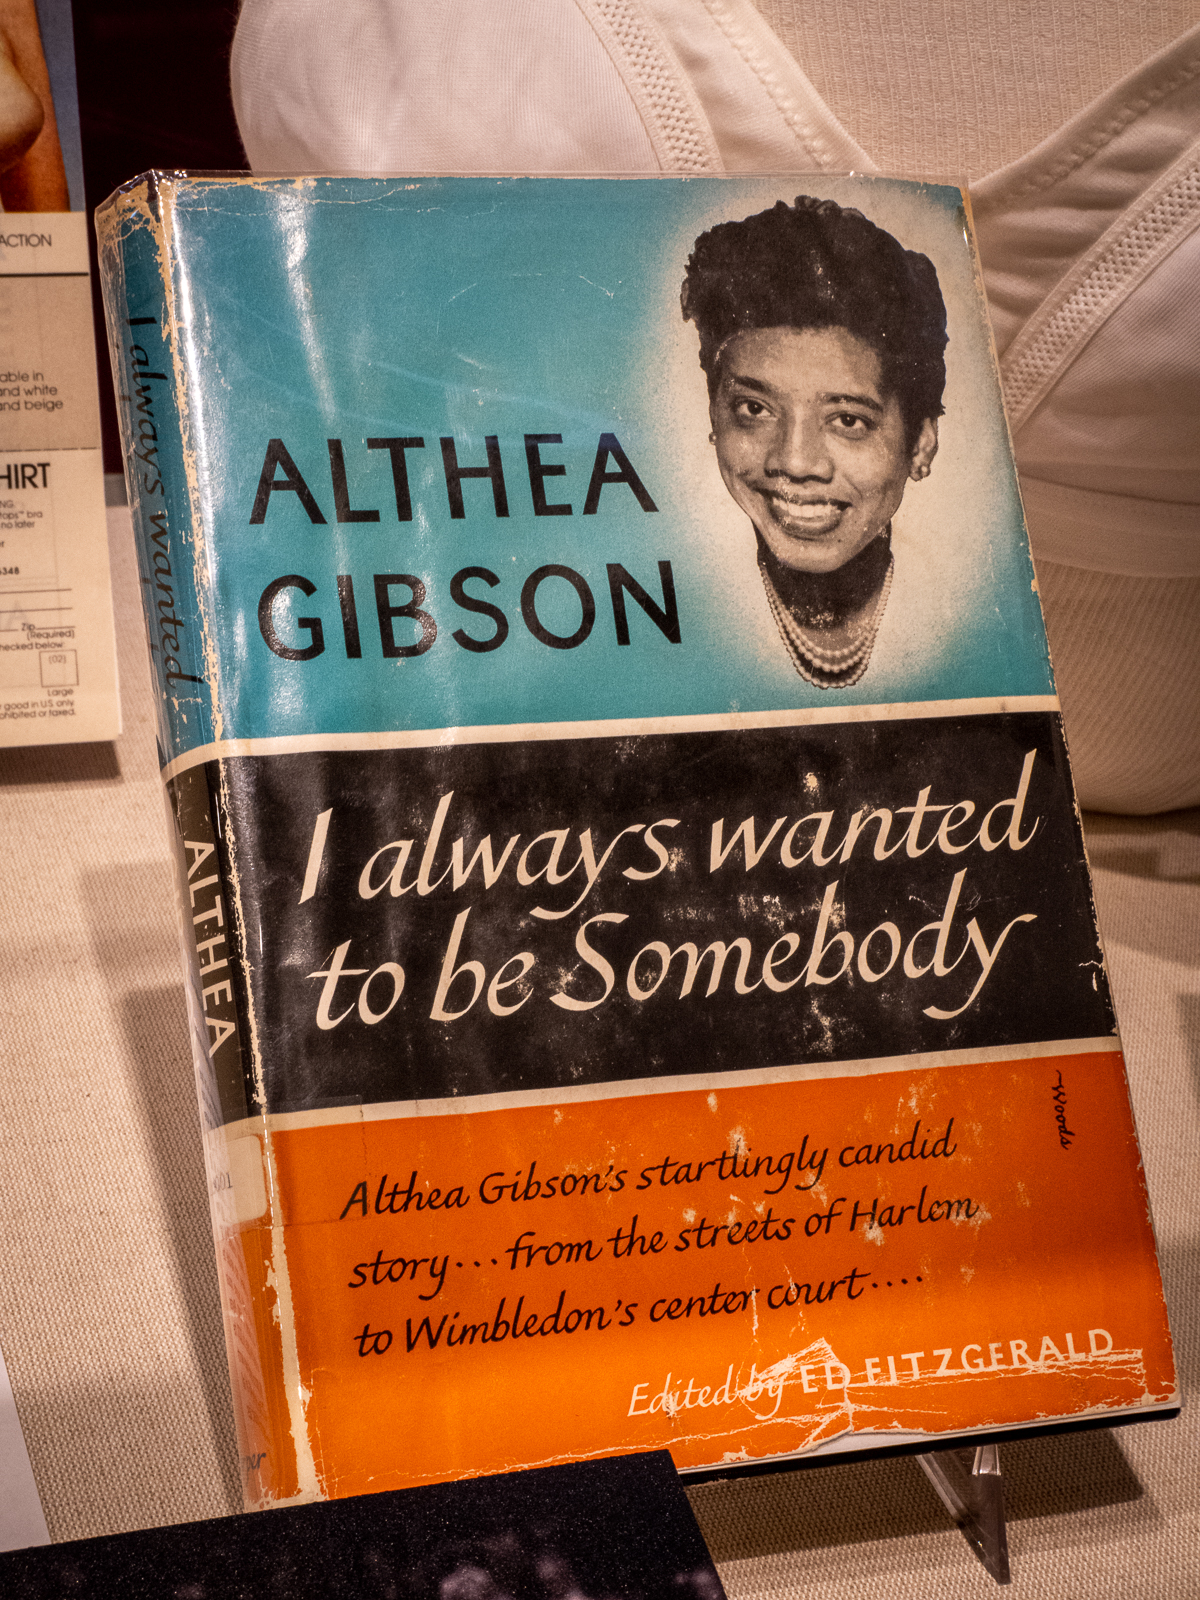 I Always Wanted to be Somebody by Althea Gibson. New York: HarperCollins, 1958. On loan from International Tennis Hall of Fame.